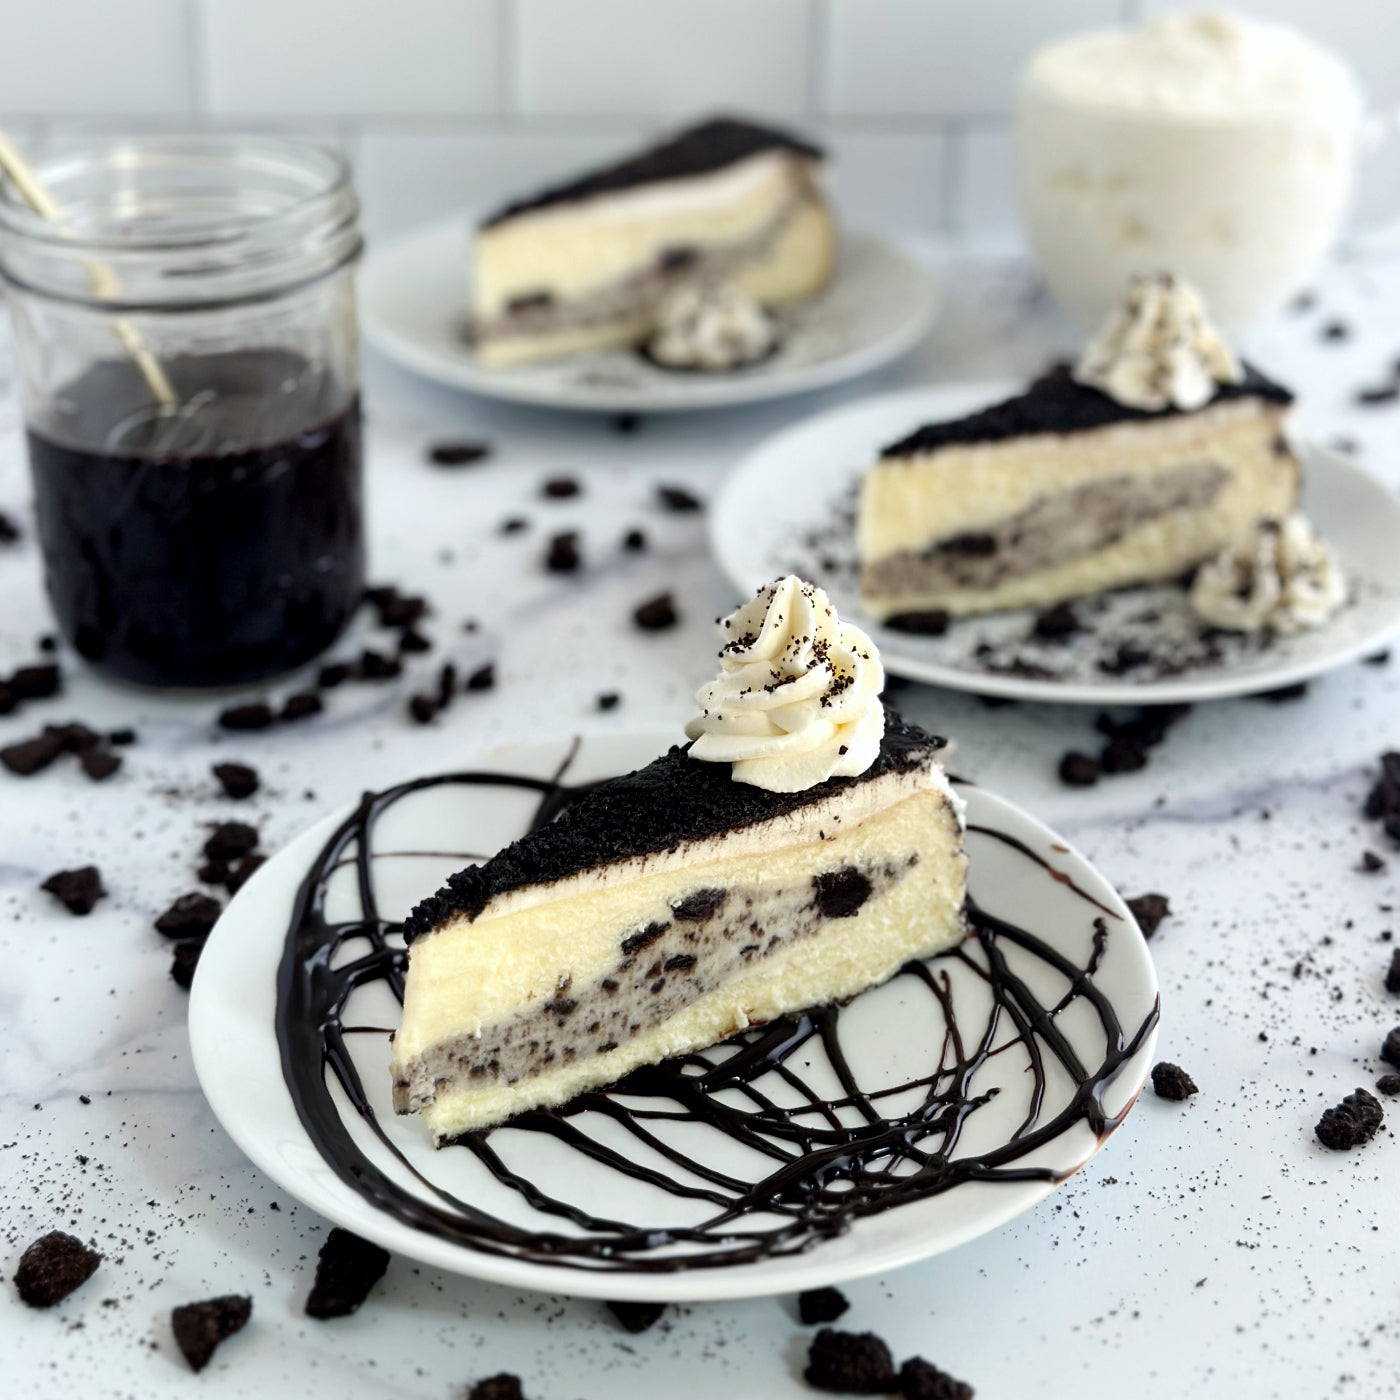 Velvety slice of Cookies & Cream Cheesecake with a thick layer of cookies and cream baked-in, sitting on a homemade chocolate swirl and topped with chocolate cookie crumbles and an elegant swirl of whipped cream.